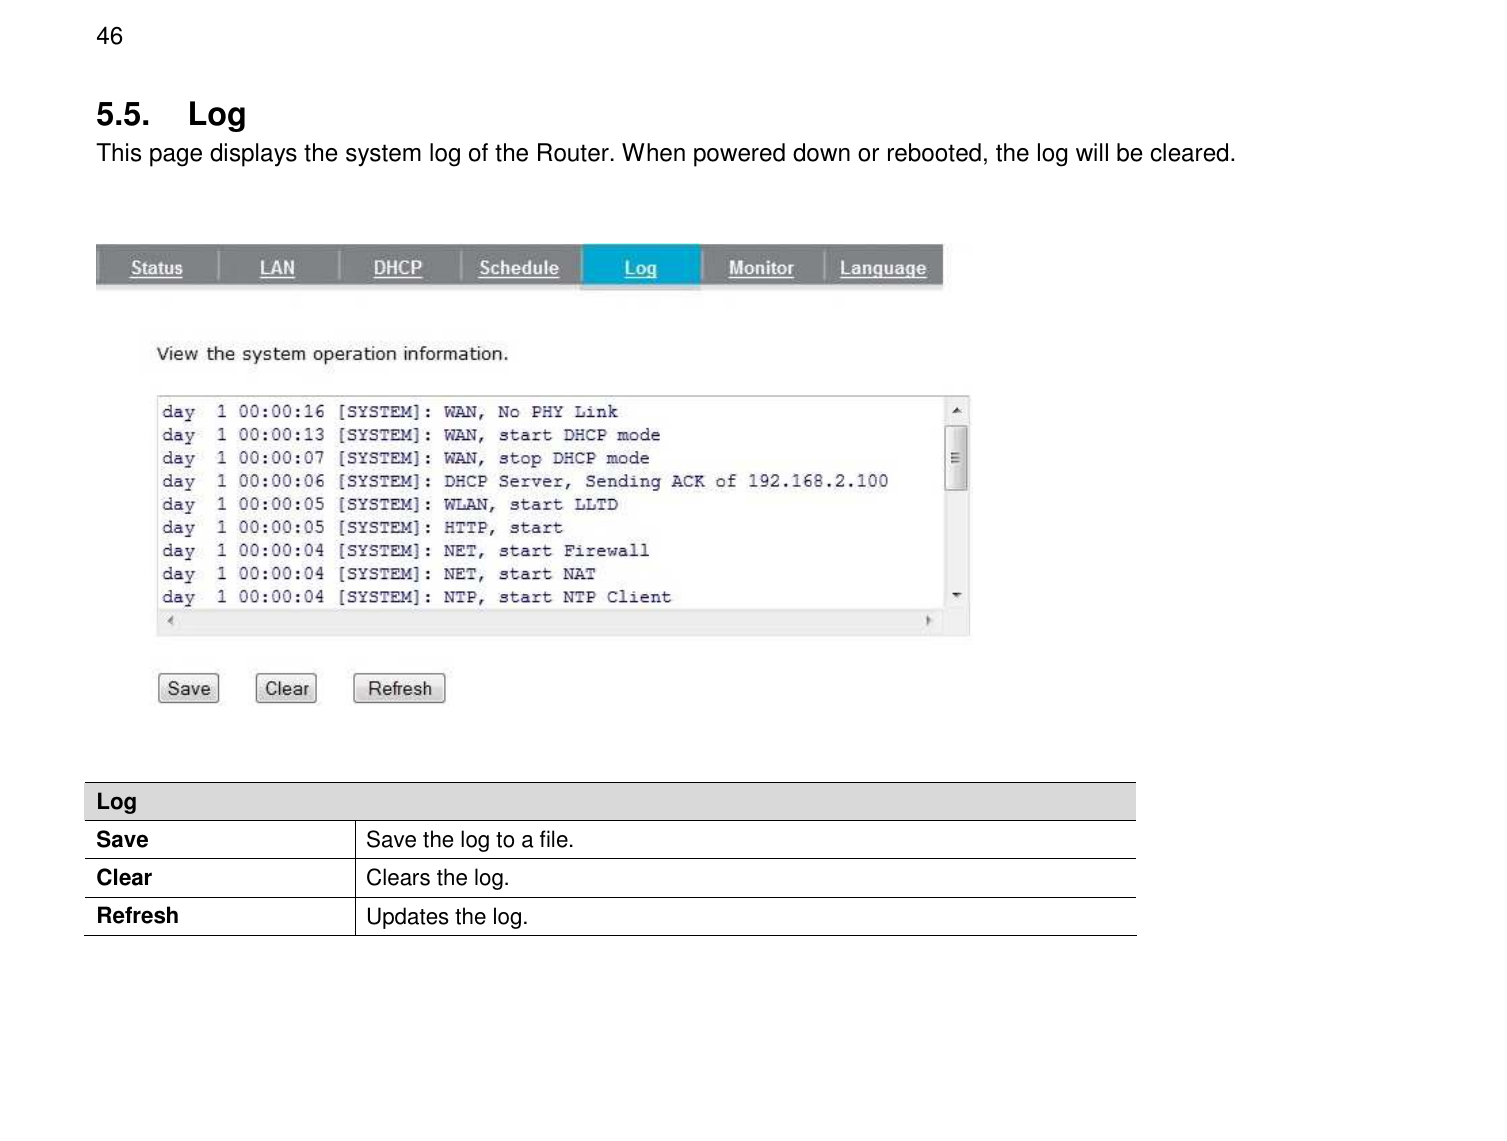  46 5.5.  Log This page displays the system log of the Router. When powered down or rebooted, the log will be cleared.    Log Save  Save the log to a file. Clear  Clears the log. Refresh  Updates the log.  